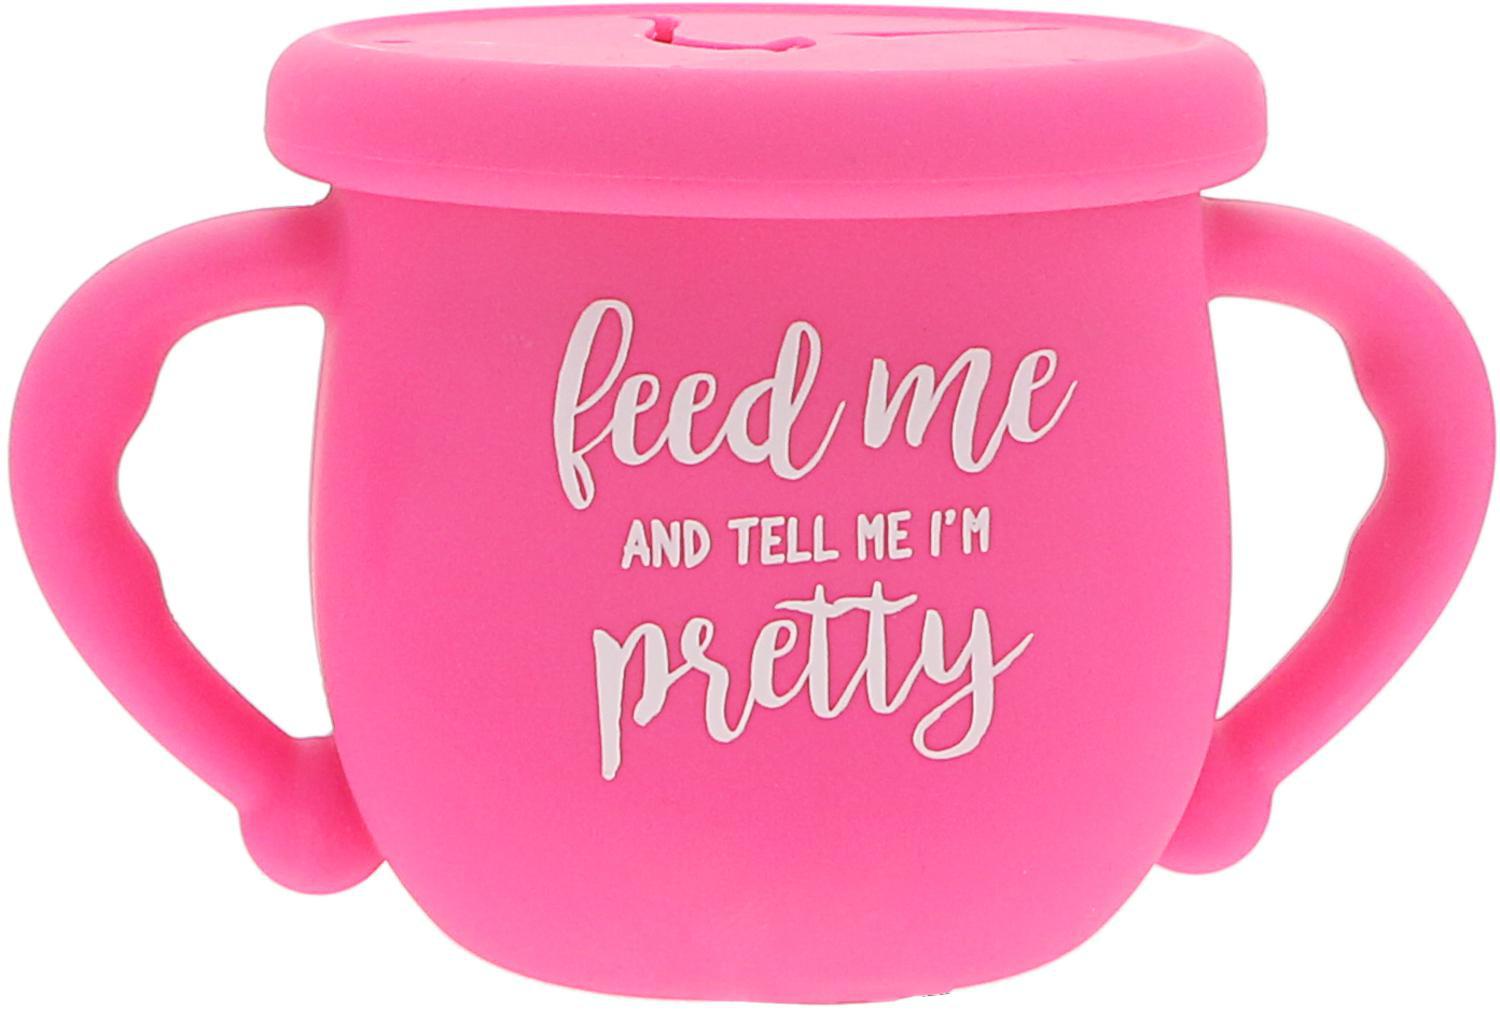 I'm Pretty - 3.5" Silicone Snack Bowl with Lid